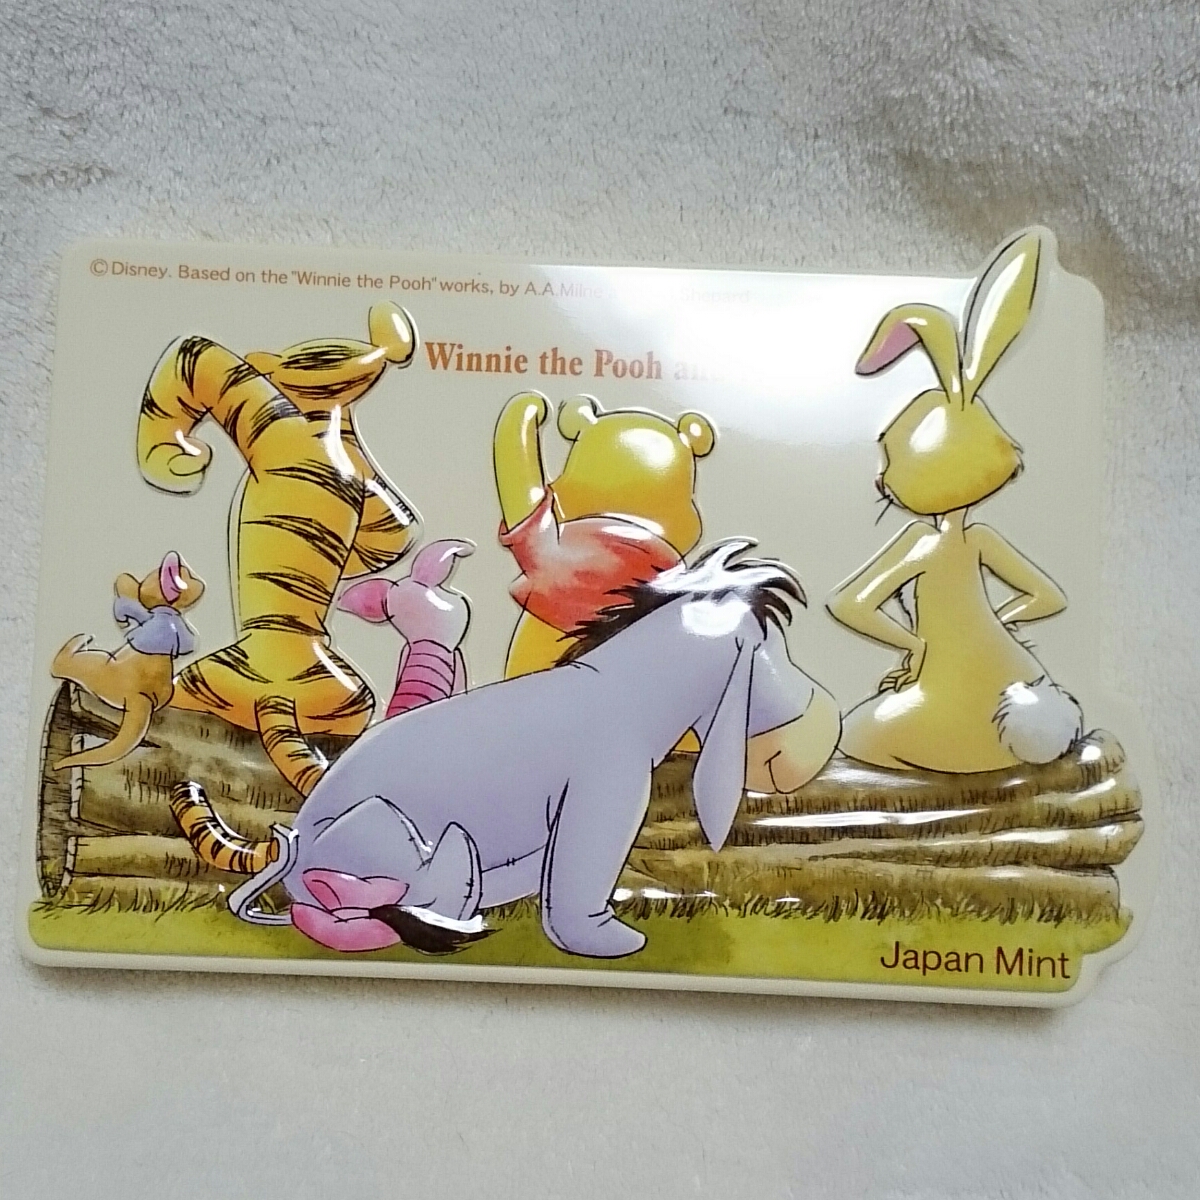  Disney Pooh 2006 80 anniversary Anniversary commemorative coin case only interior picture frame Tiger i-you Winnie The Pooh 